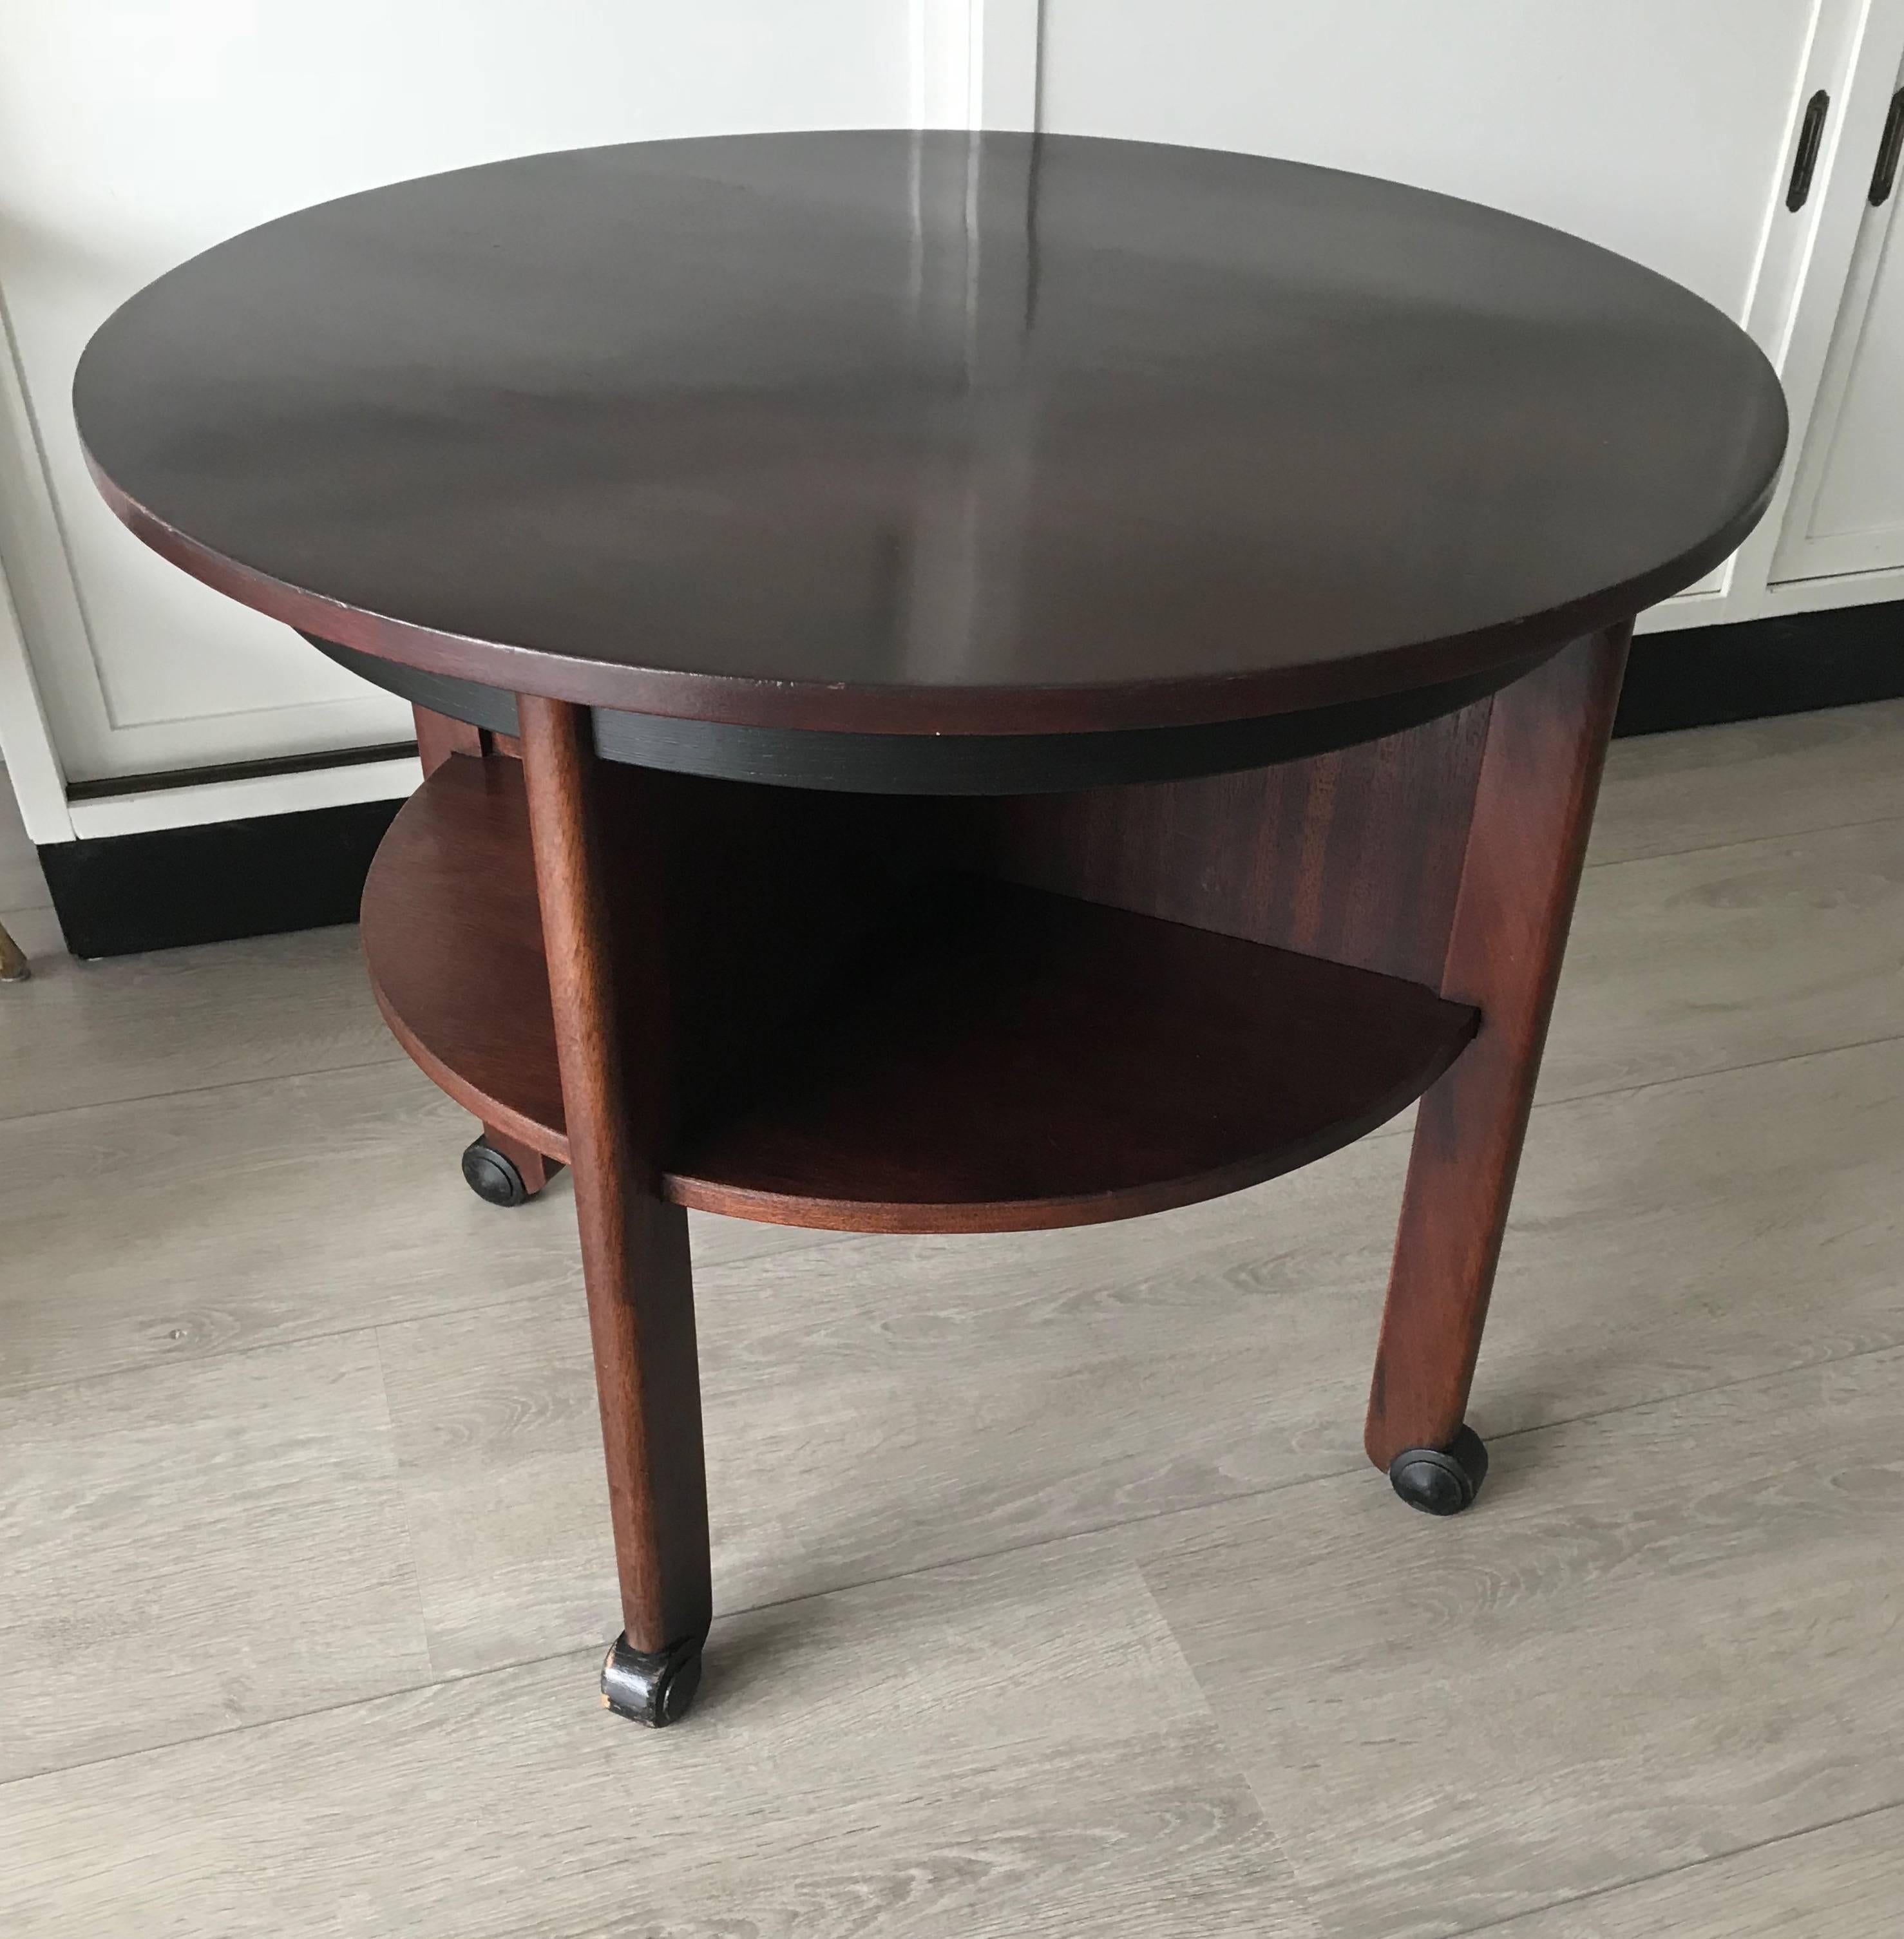 Dutch Wooden Art Deco Round Coffee or End Table with Four Shelfs for Books Etc For Sale